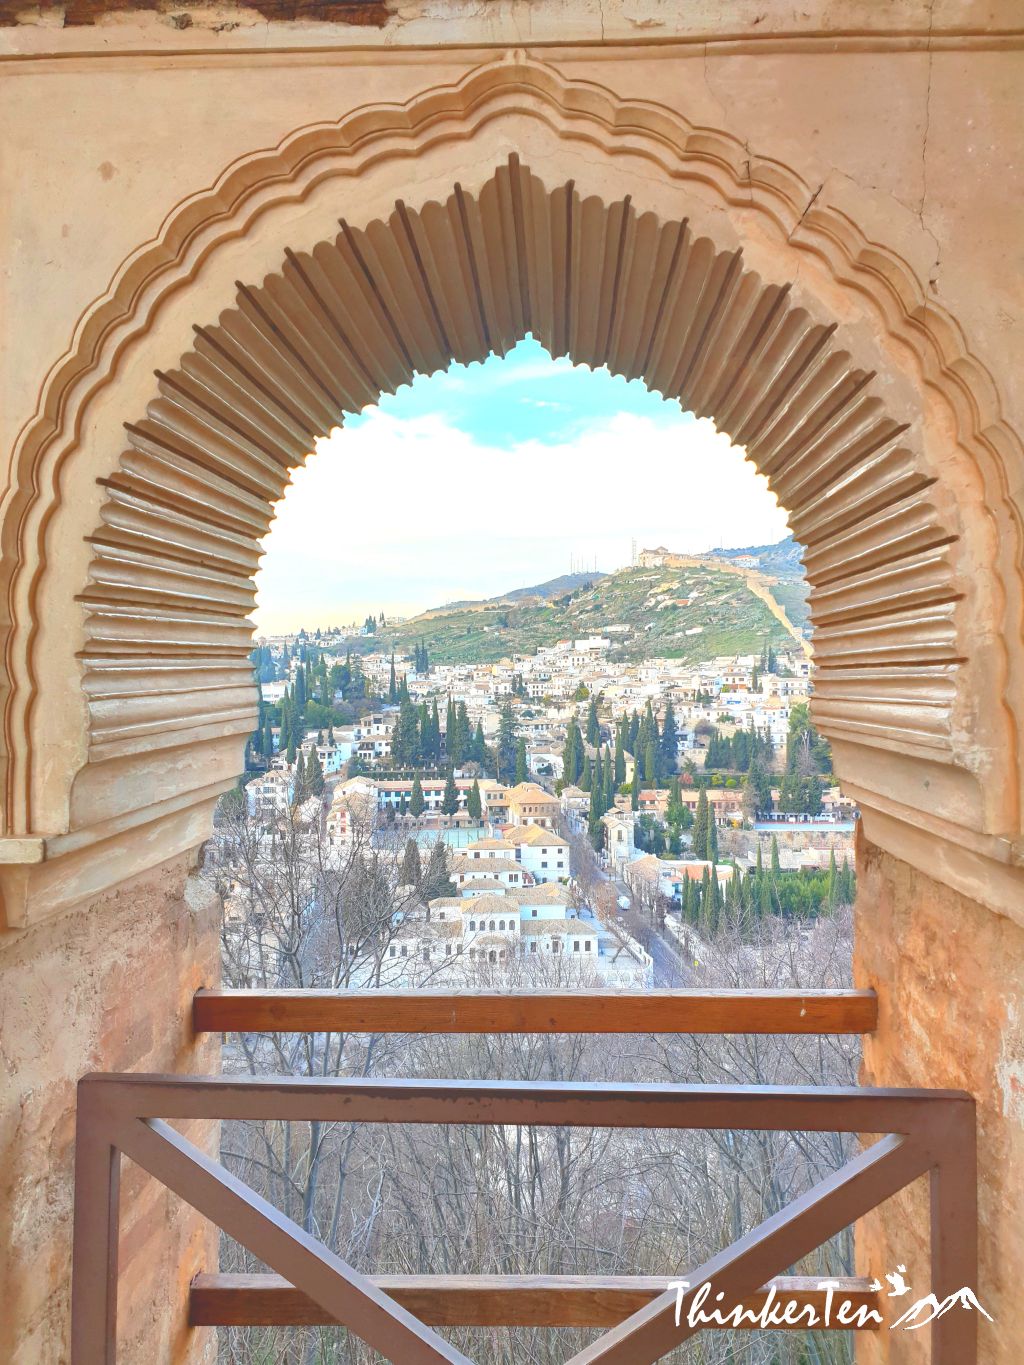 Top 10 things to know before you visit Alhambra, Granada Spain